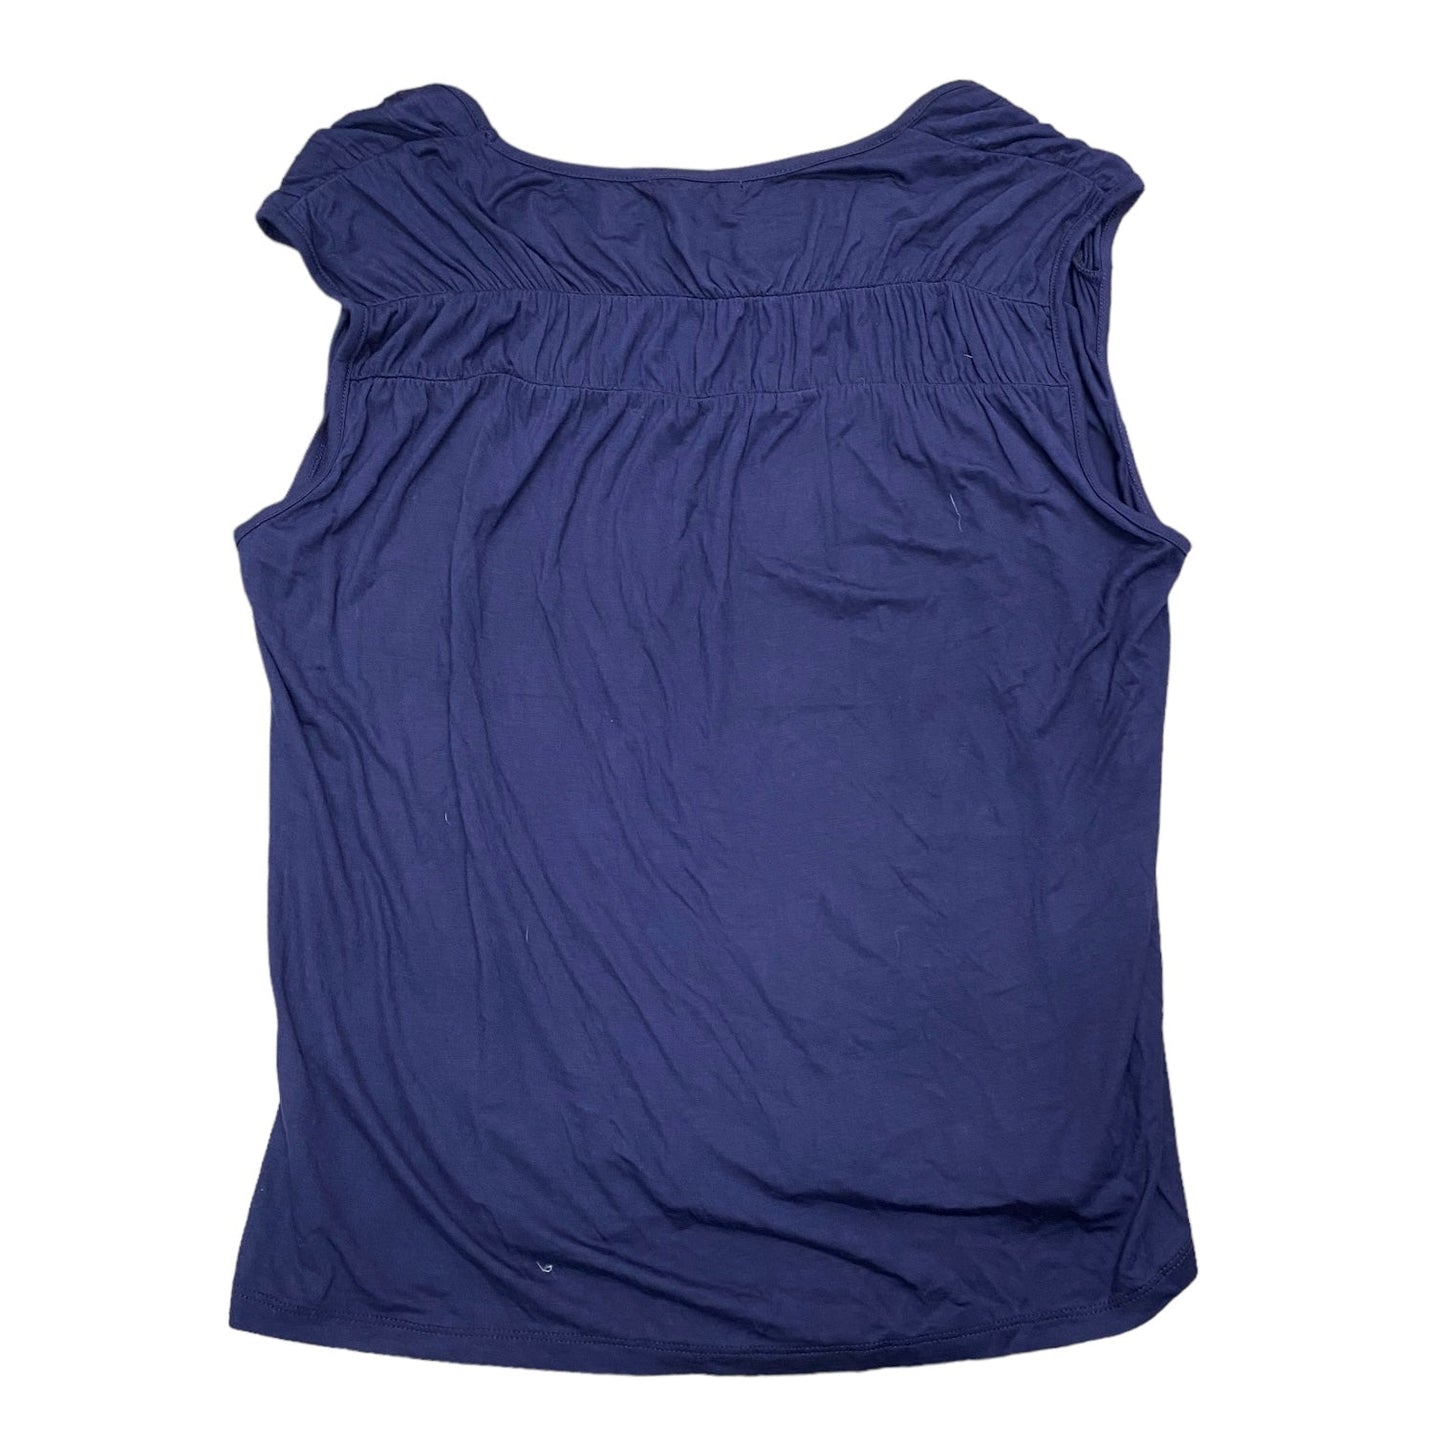 Navy Top Sleeveless Staccato, Size L